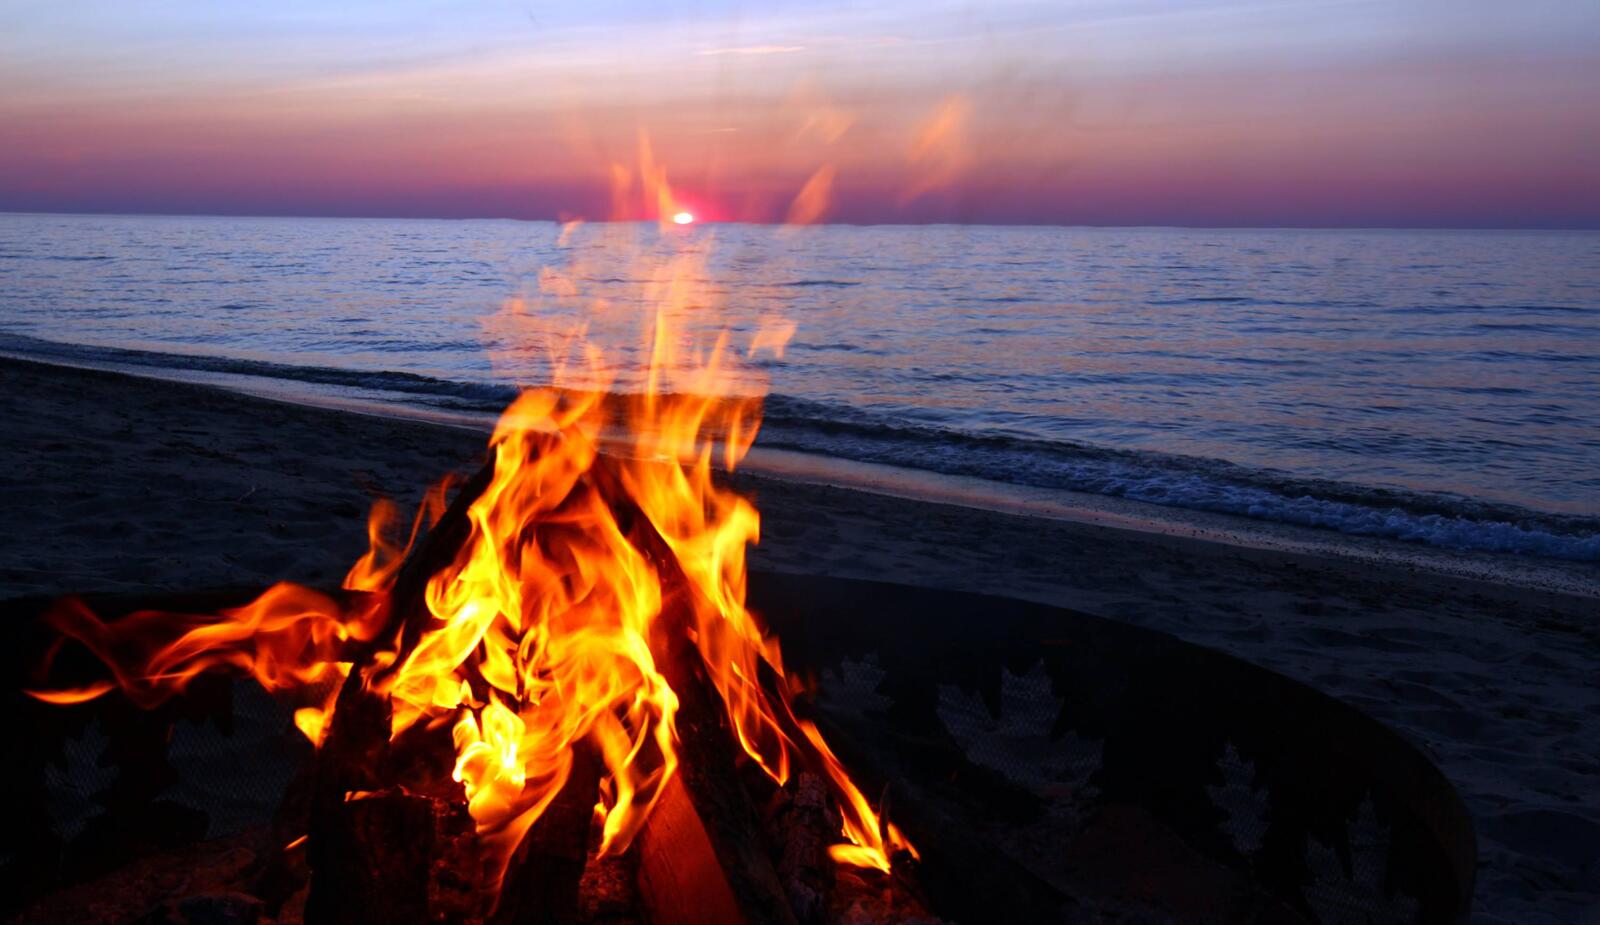 Wallpapers bonfire by the sea beach nature on the desktop